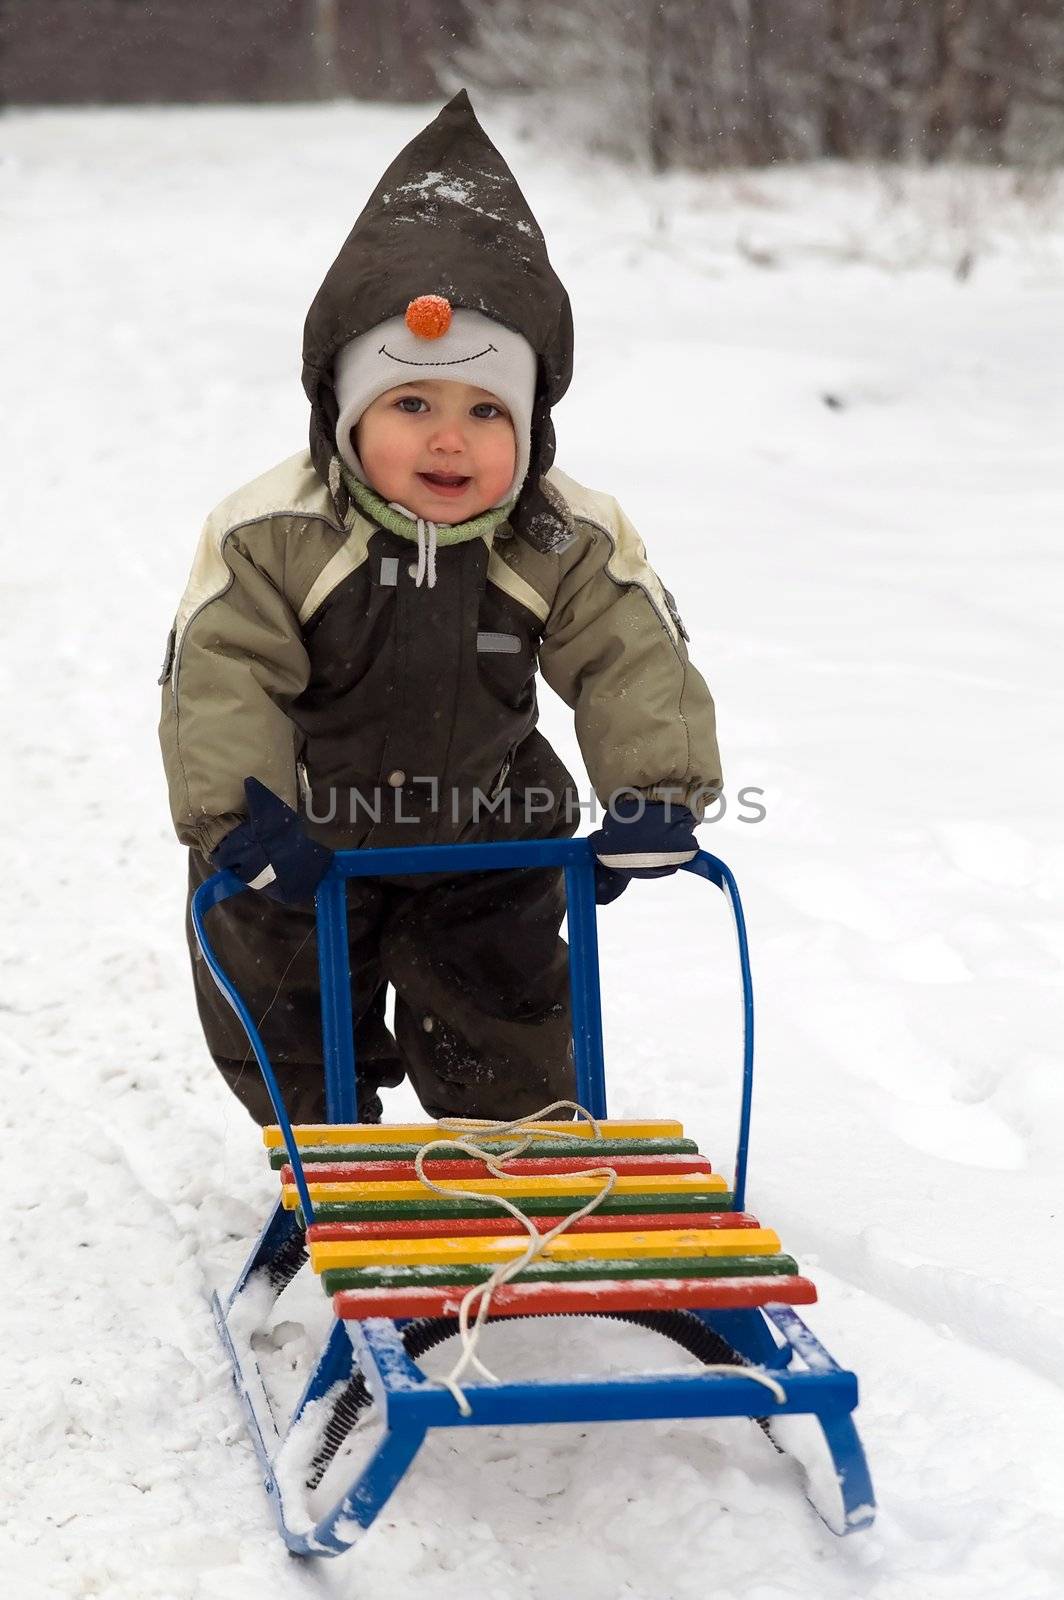 Baby in green coat pushing sled in snow-covered park